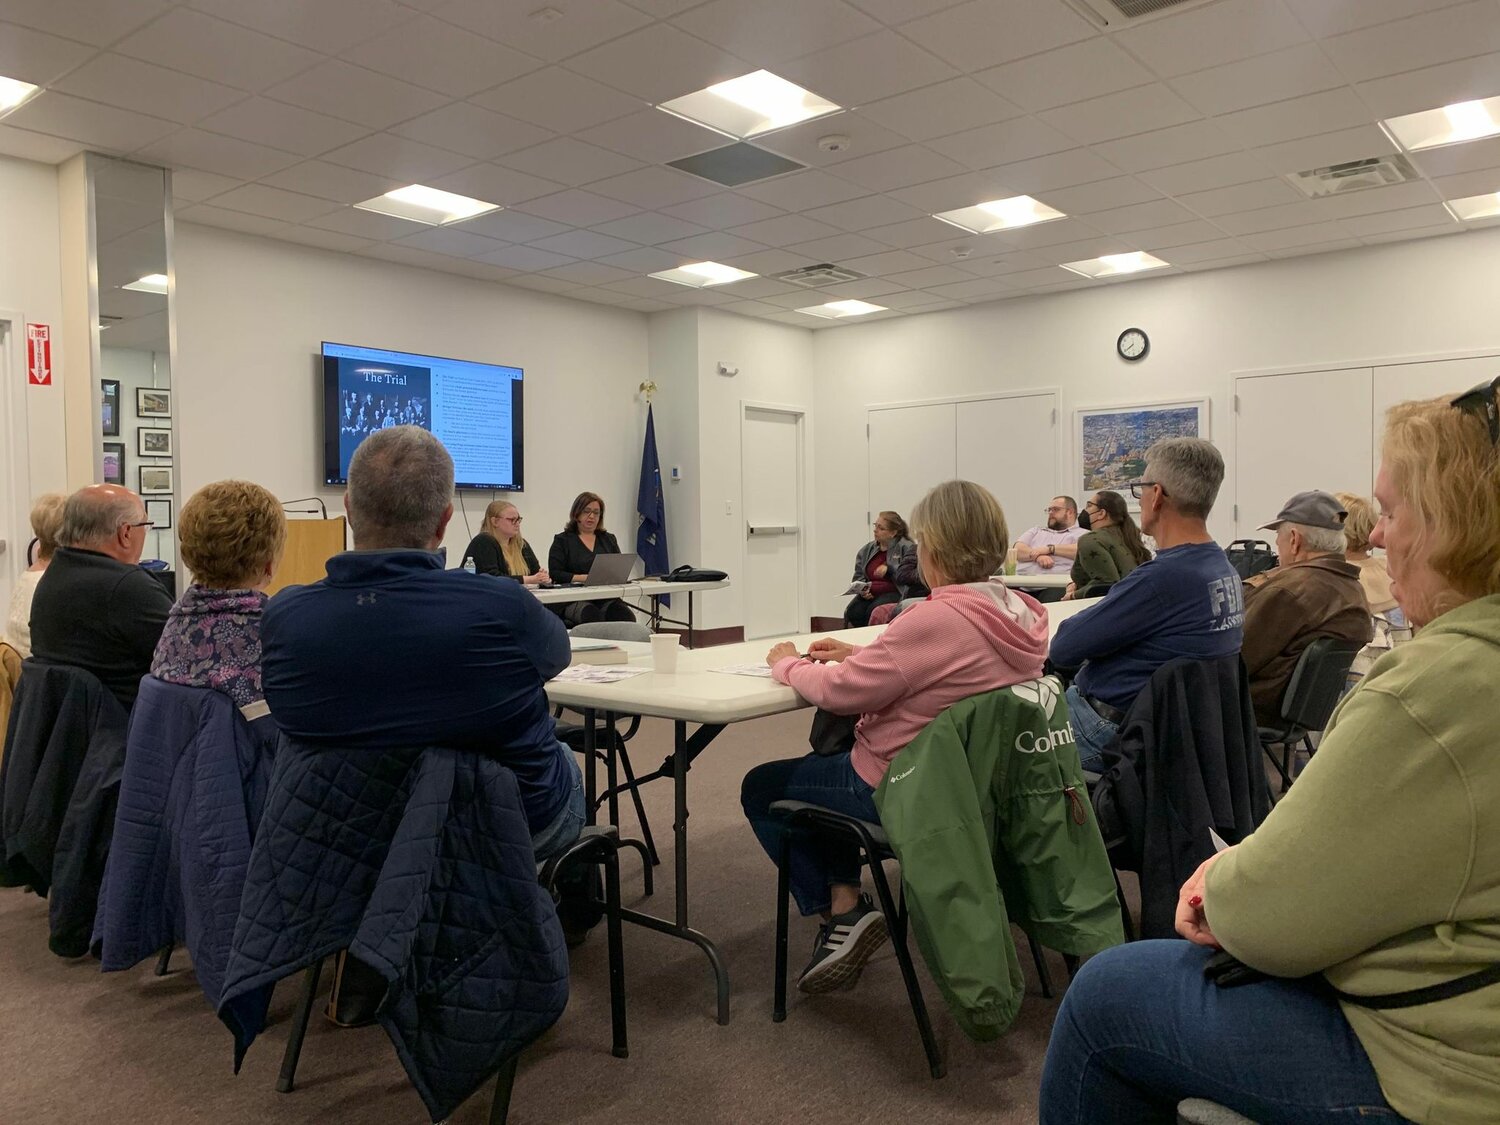 Amateur sleuths in the Oceanside Library Plot Twist: A True Crime Club met up on April 18 to discuss the Lizzie Borden murder case. Librarians Emily Van Allen and Nadine Buccilli started the group last year and lead monthly discussions and club events.